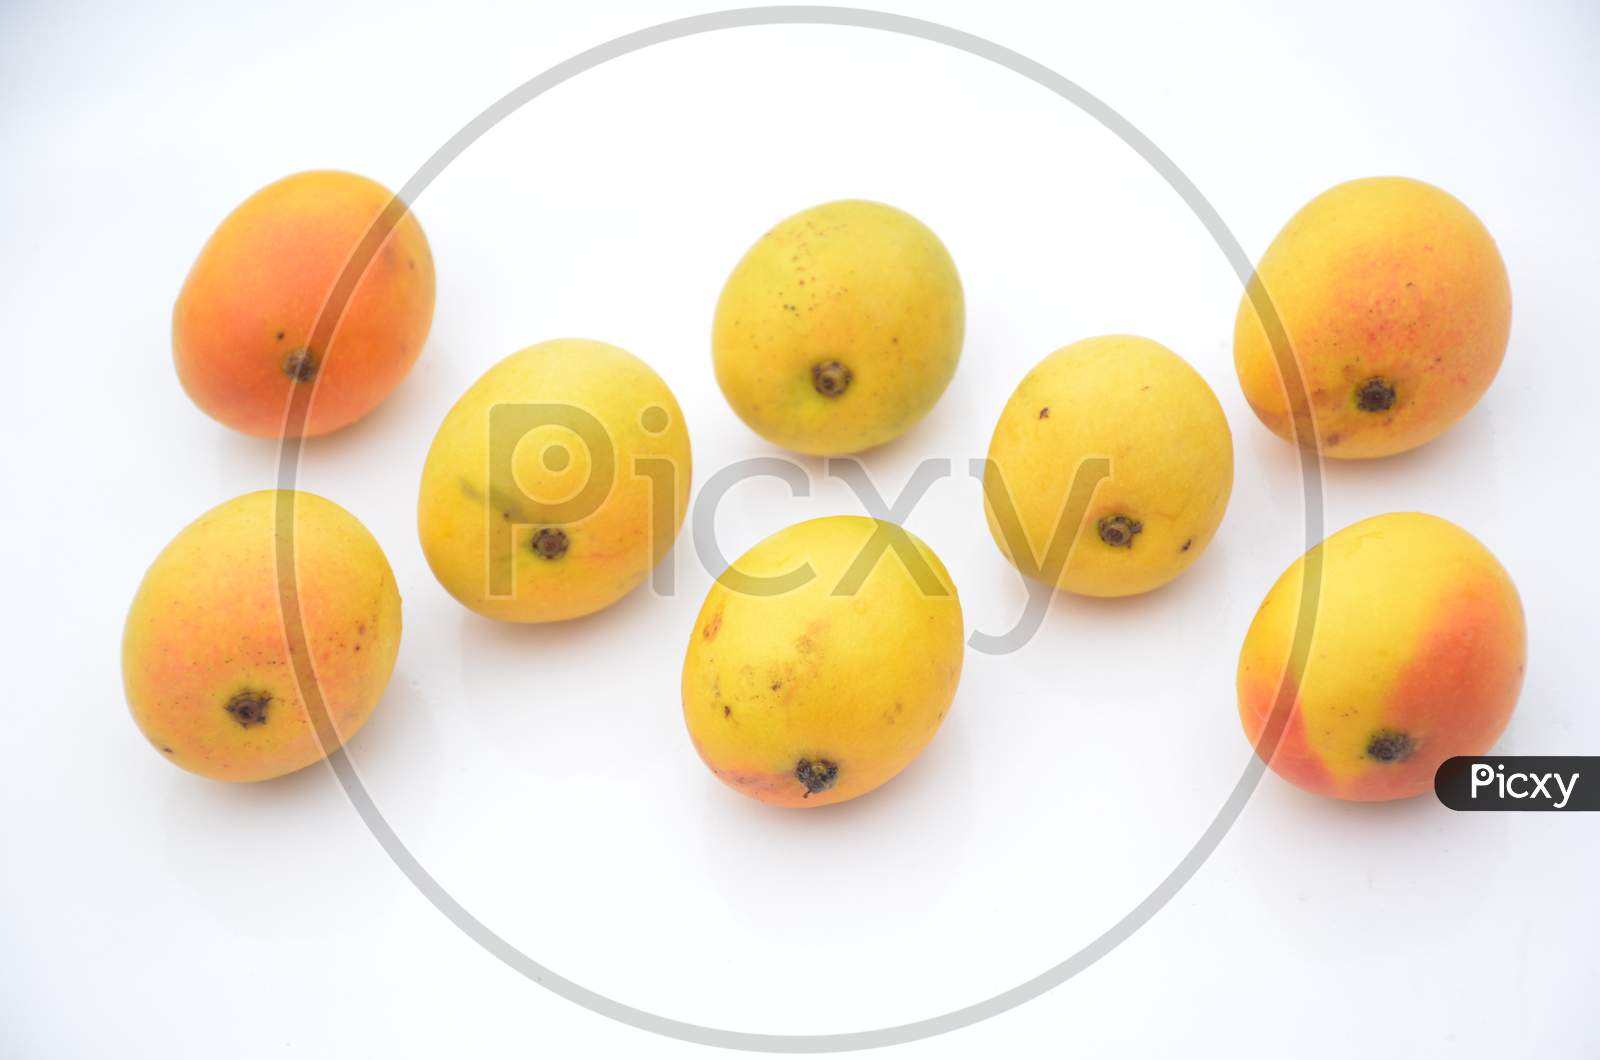 Bunch The Red Yellow Mango Isolated In White Background